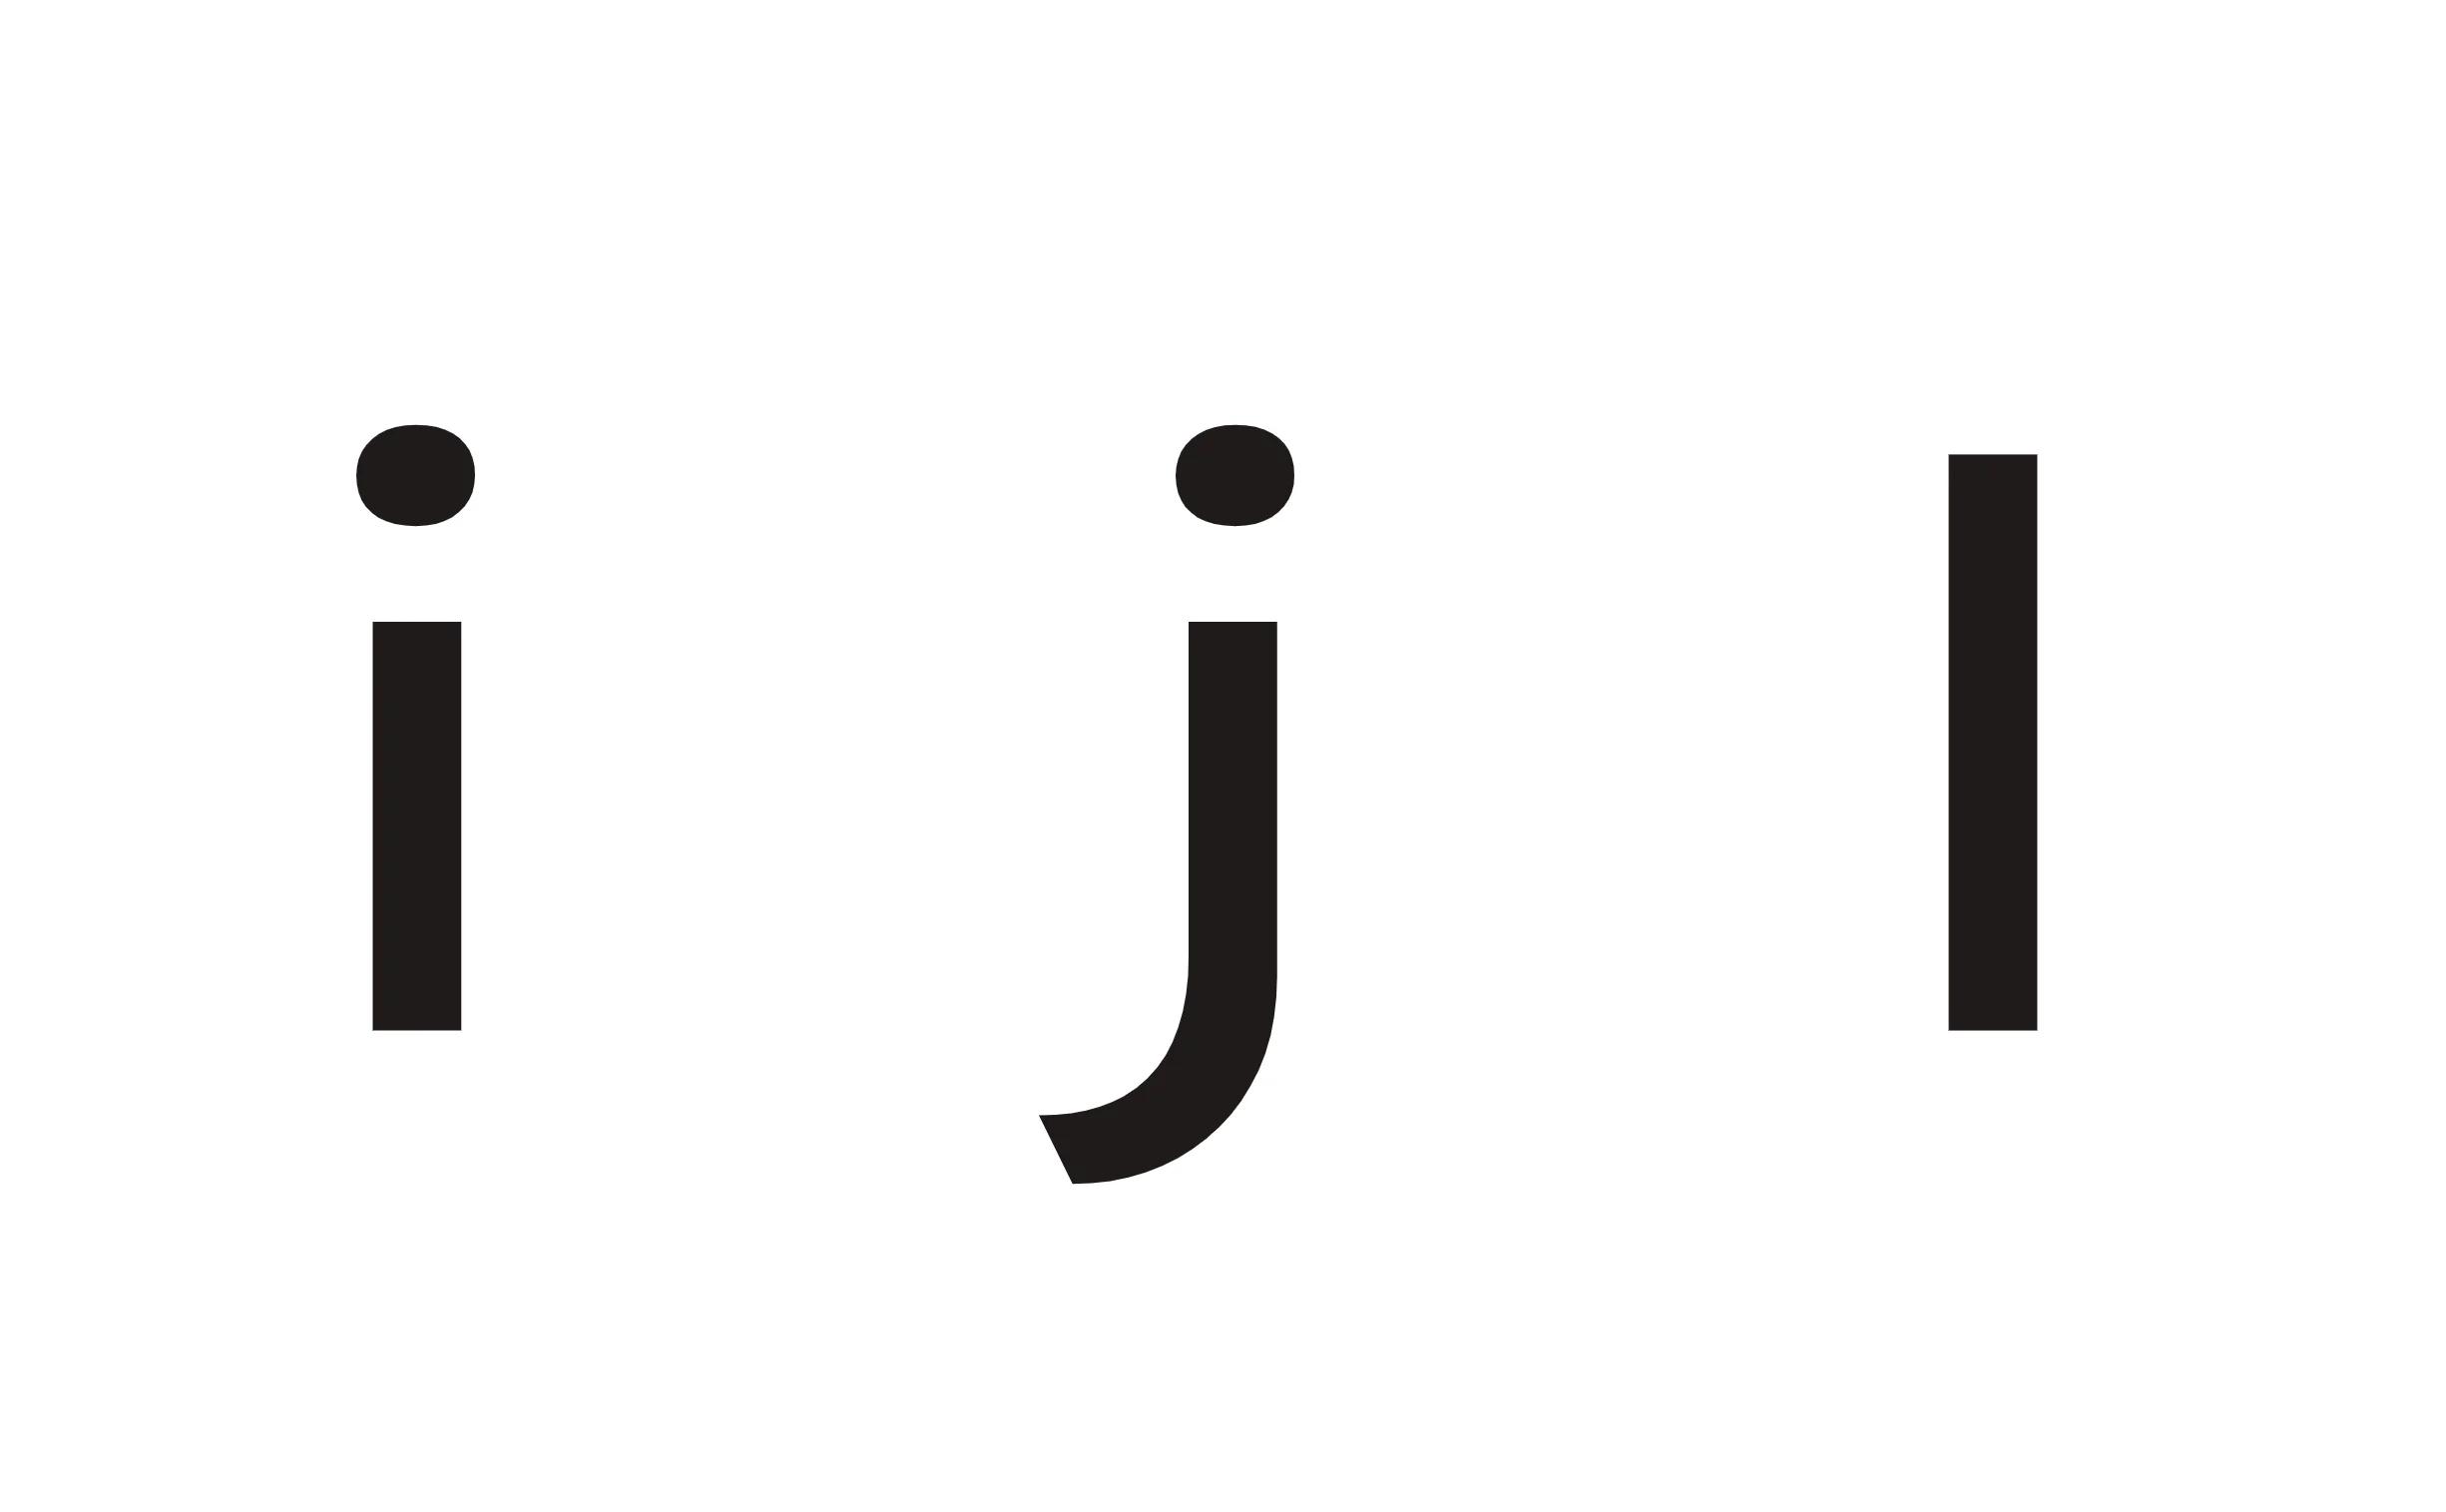 Lowercase i, j, and l